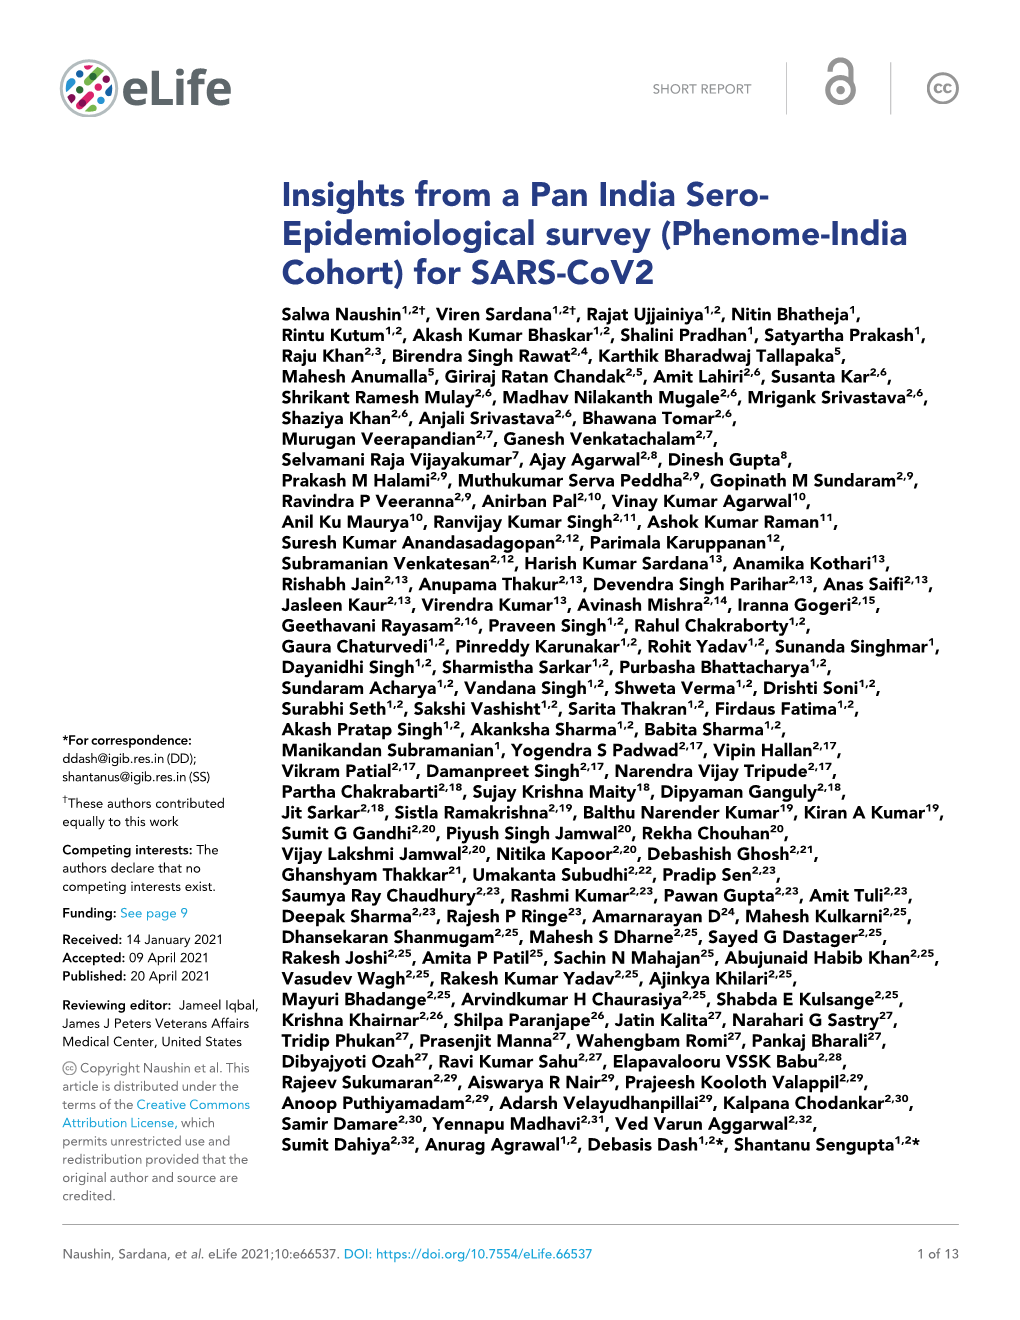 Insights from a Pan India Sero- Epidemiological Survey